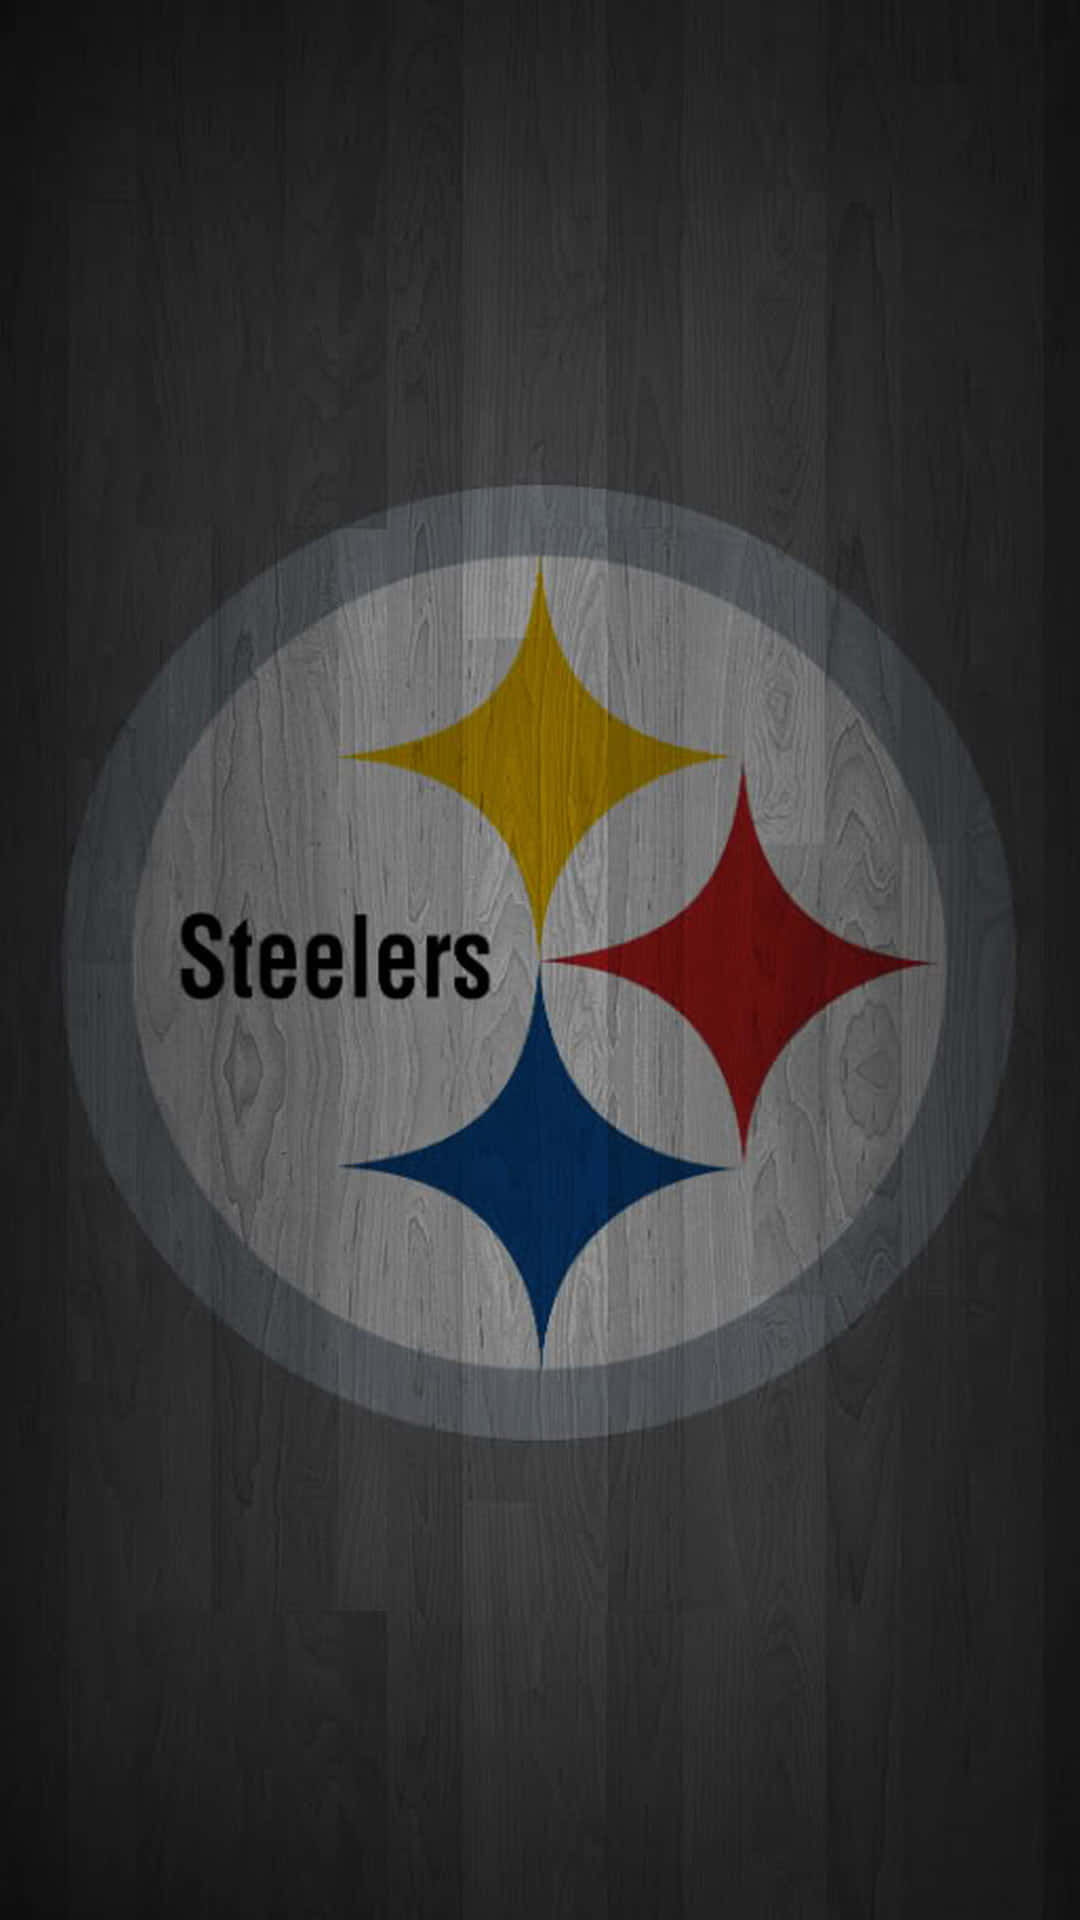 "Going for Gold - Rely on the Steelers Phone" Wallpaper